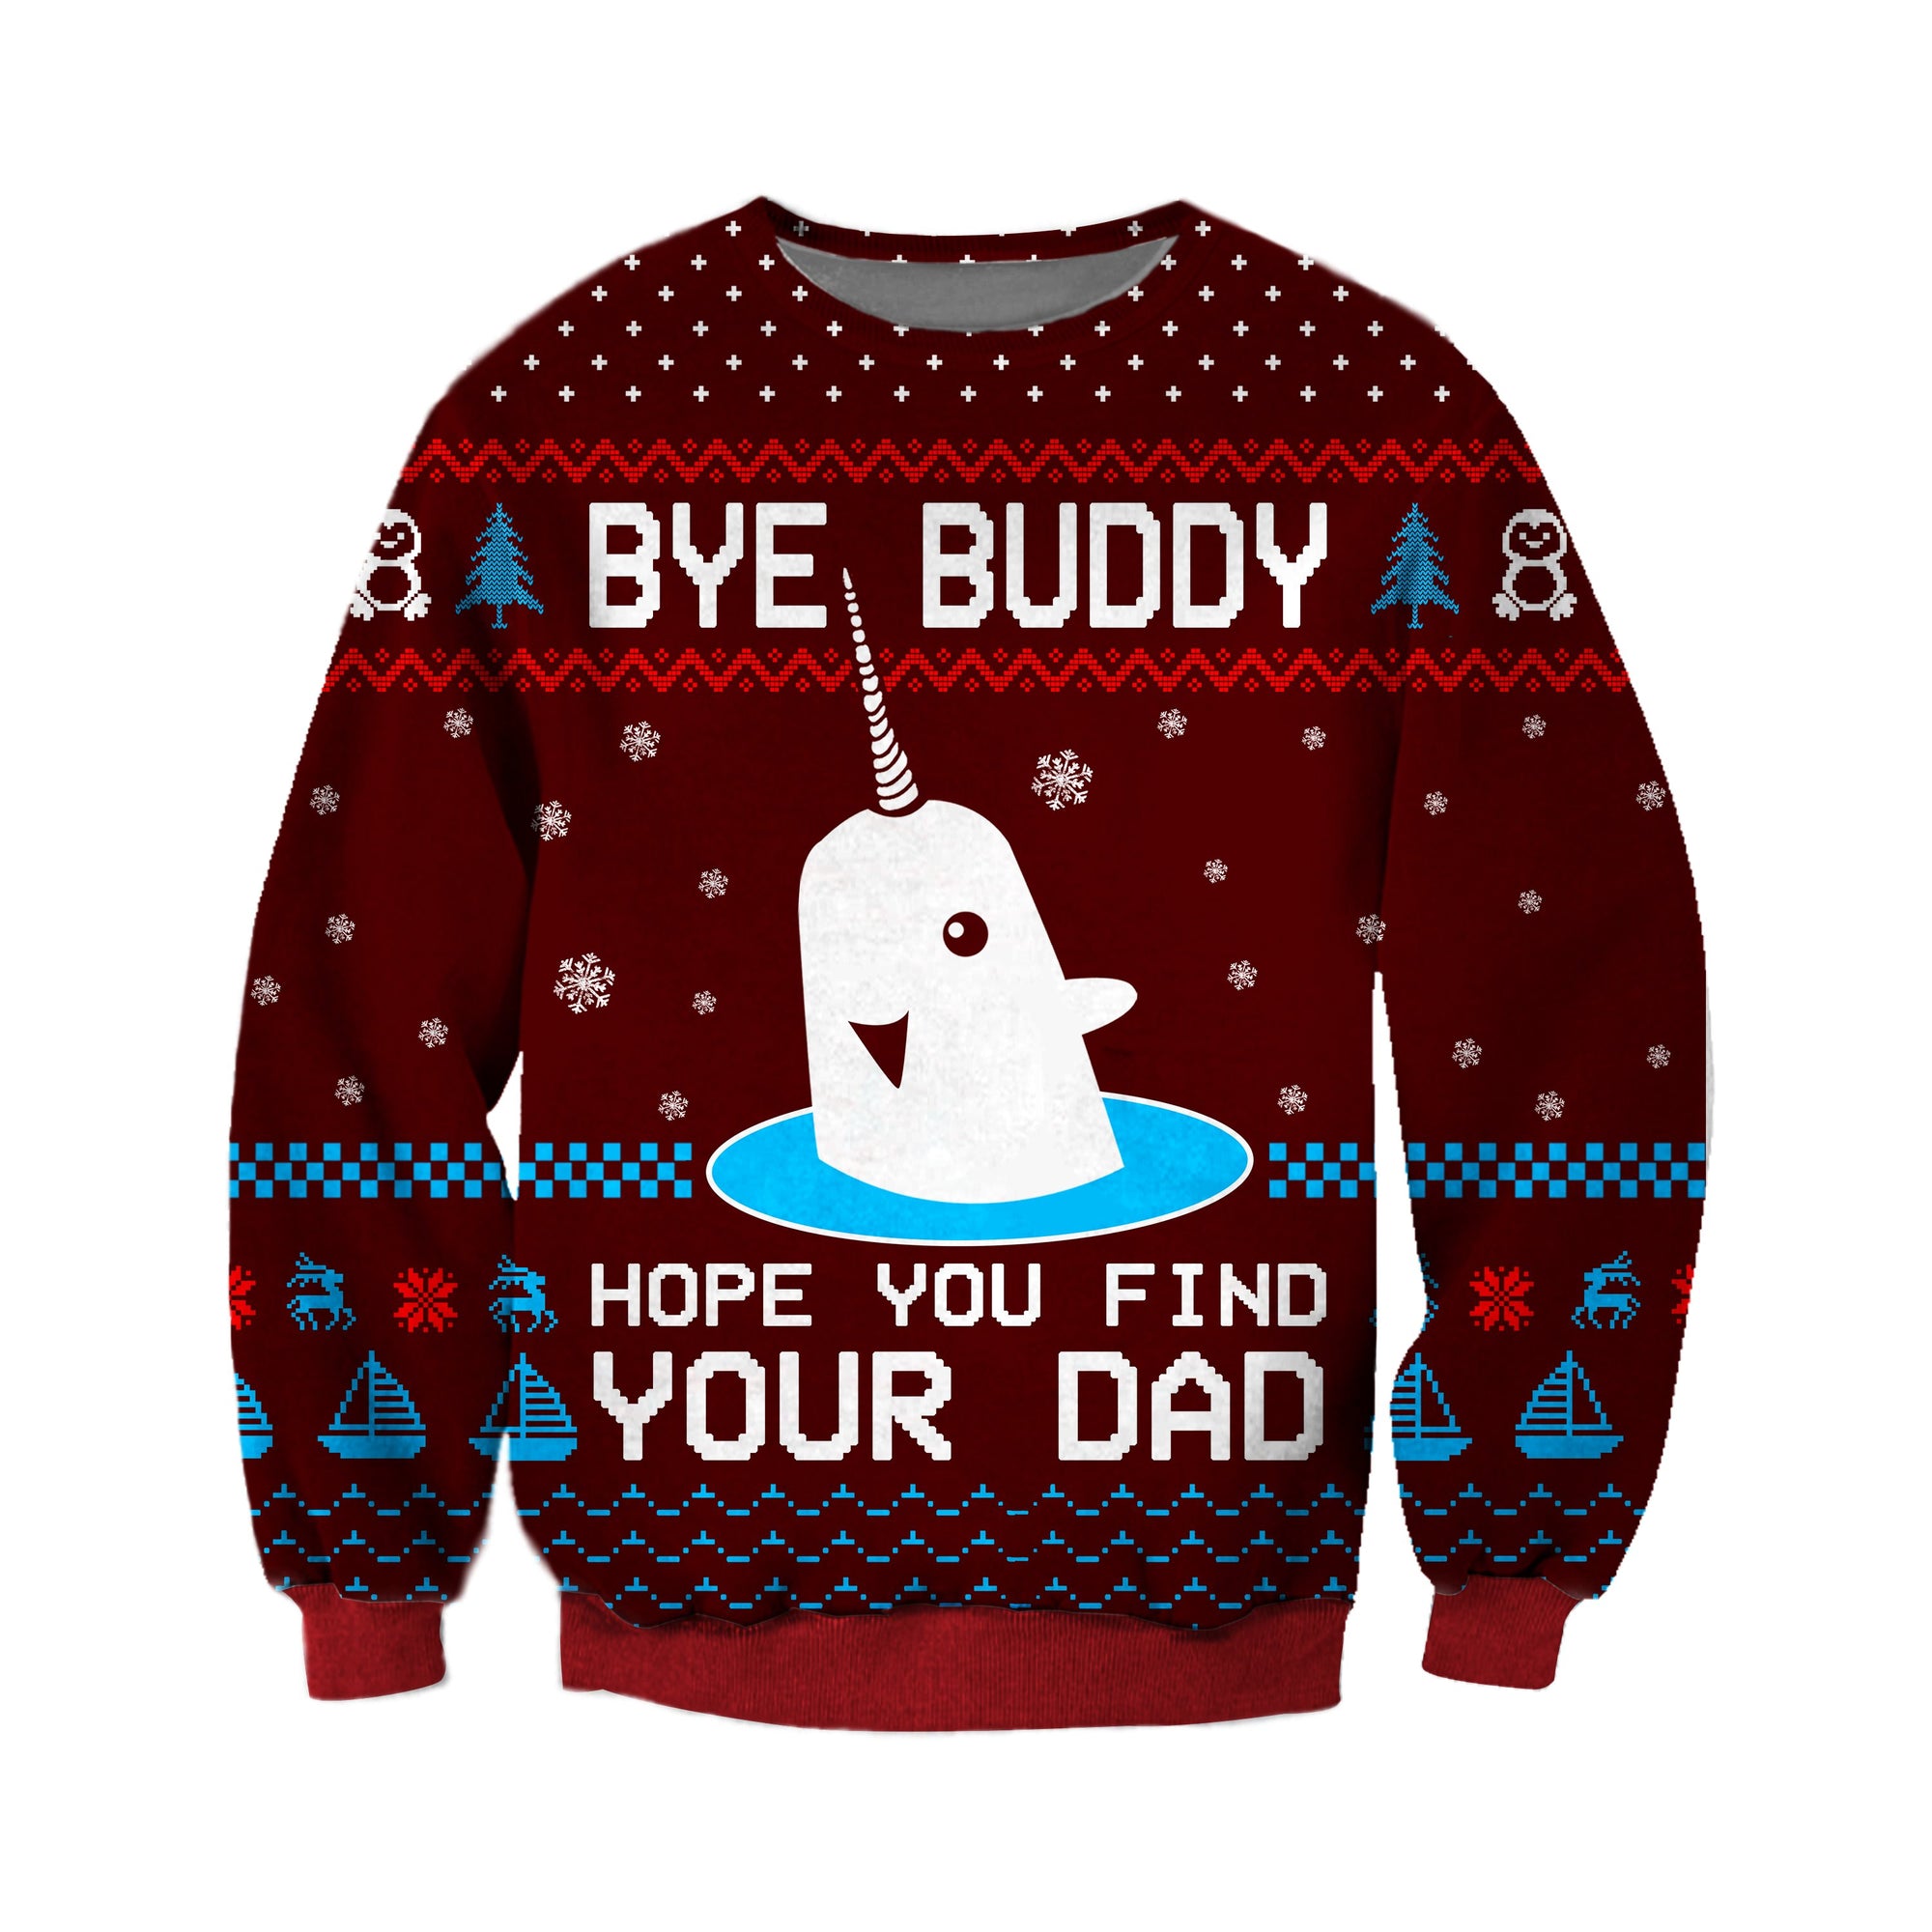 Bye Buddy Knitting Pattern 3D Print Ugly Christmas Sweater Hoodie All Over Printed Cint10719 1